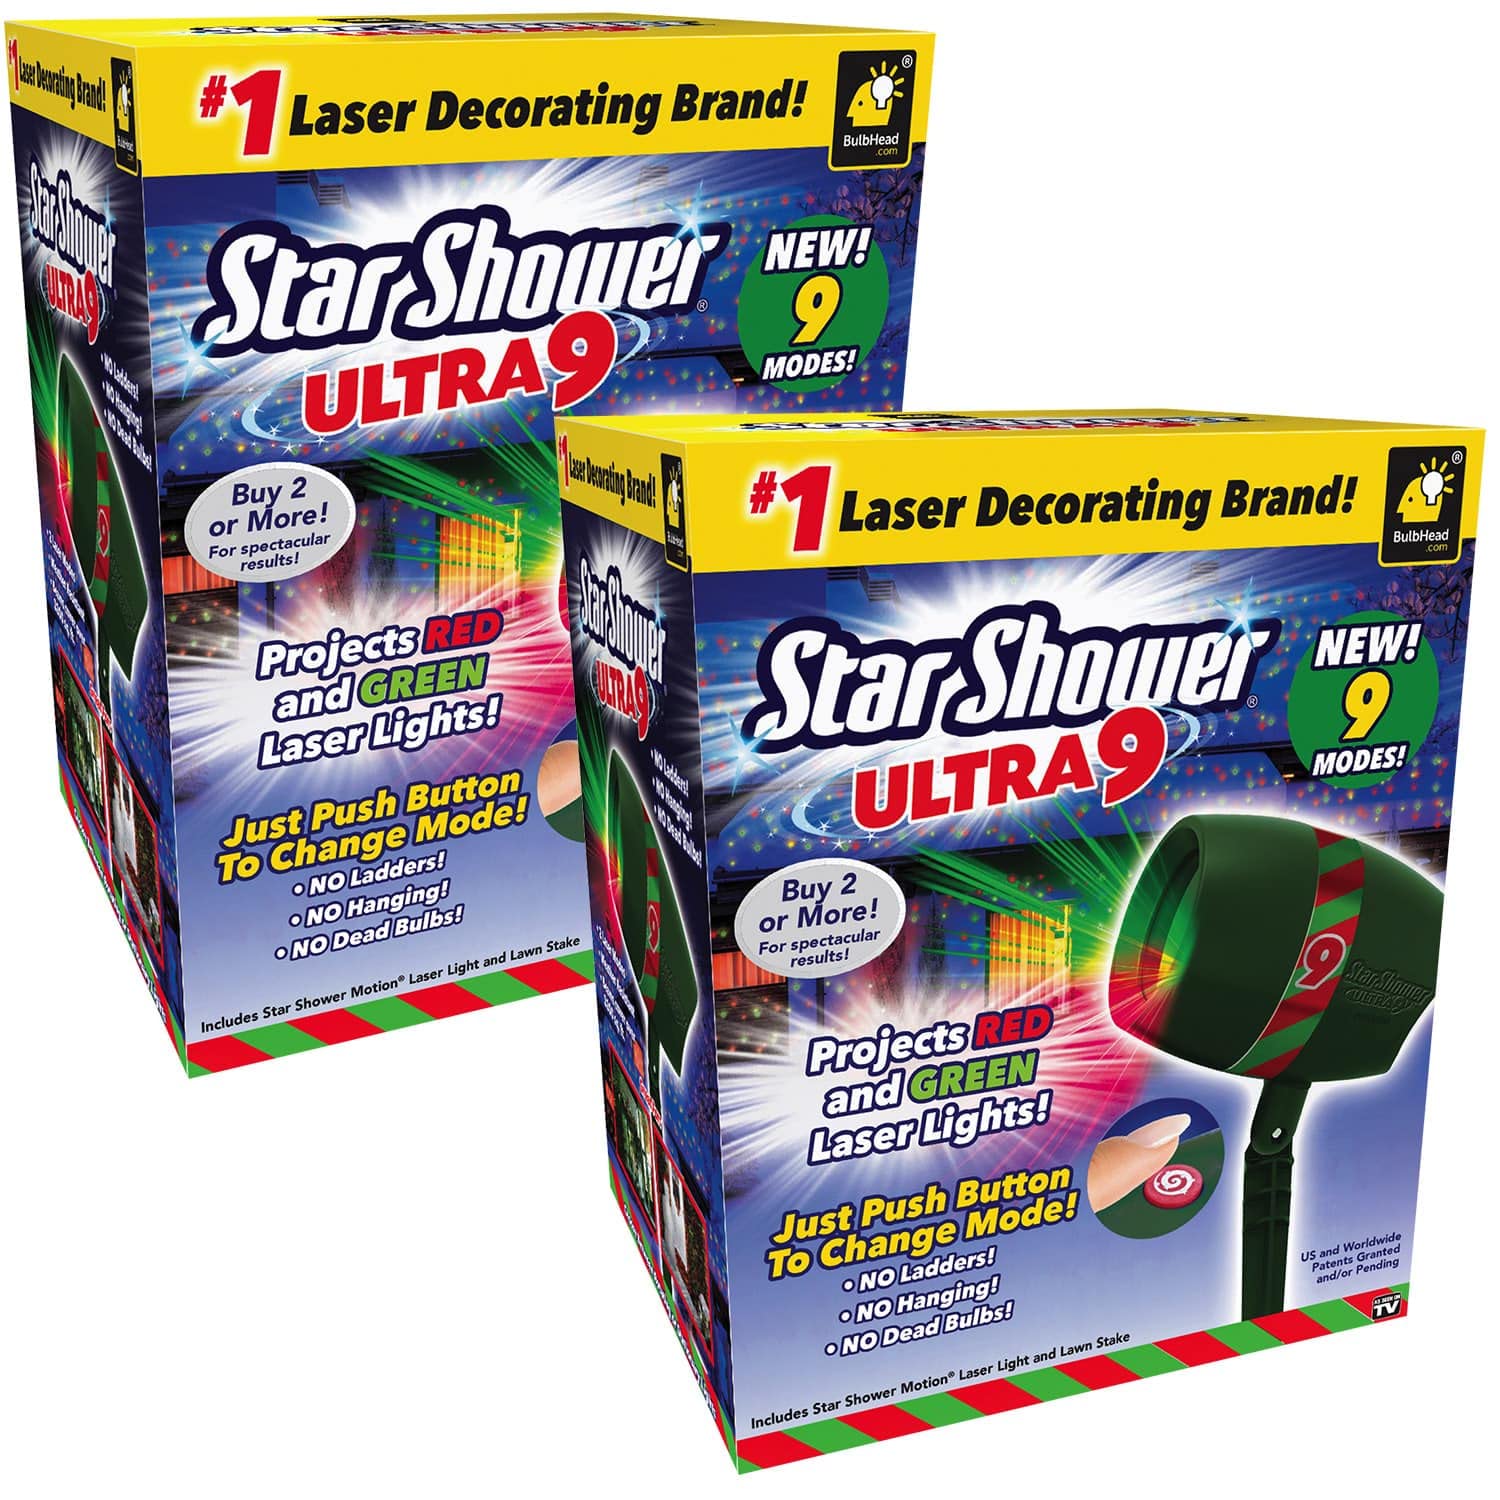 Star Shower Ultra 9 AS-SEEN-ON-TV with 9 Enhanced Modes for Spectacular Outdoor Holiday Laser Lighting with Thousands of Lights Covering 3200 Square feet, Pack of 2